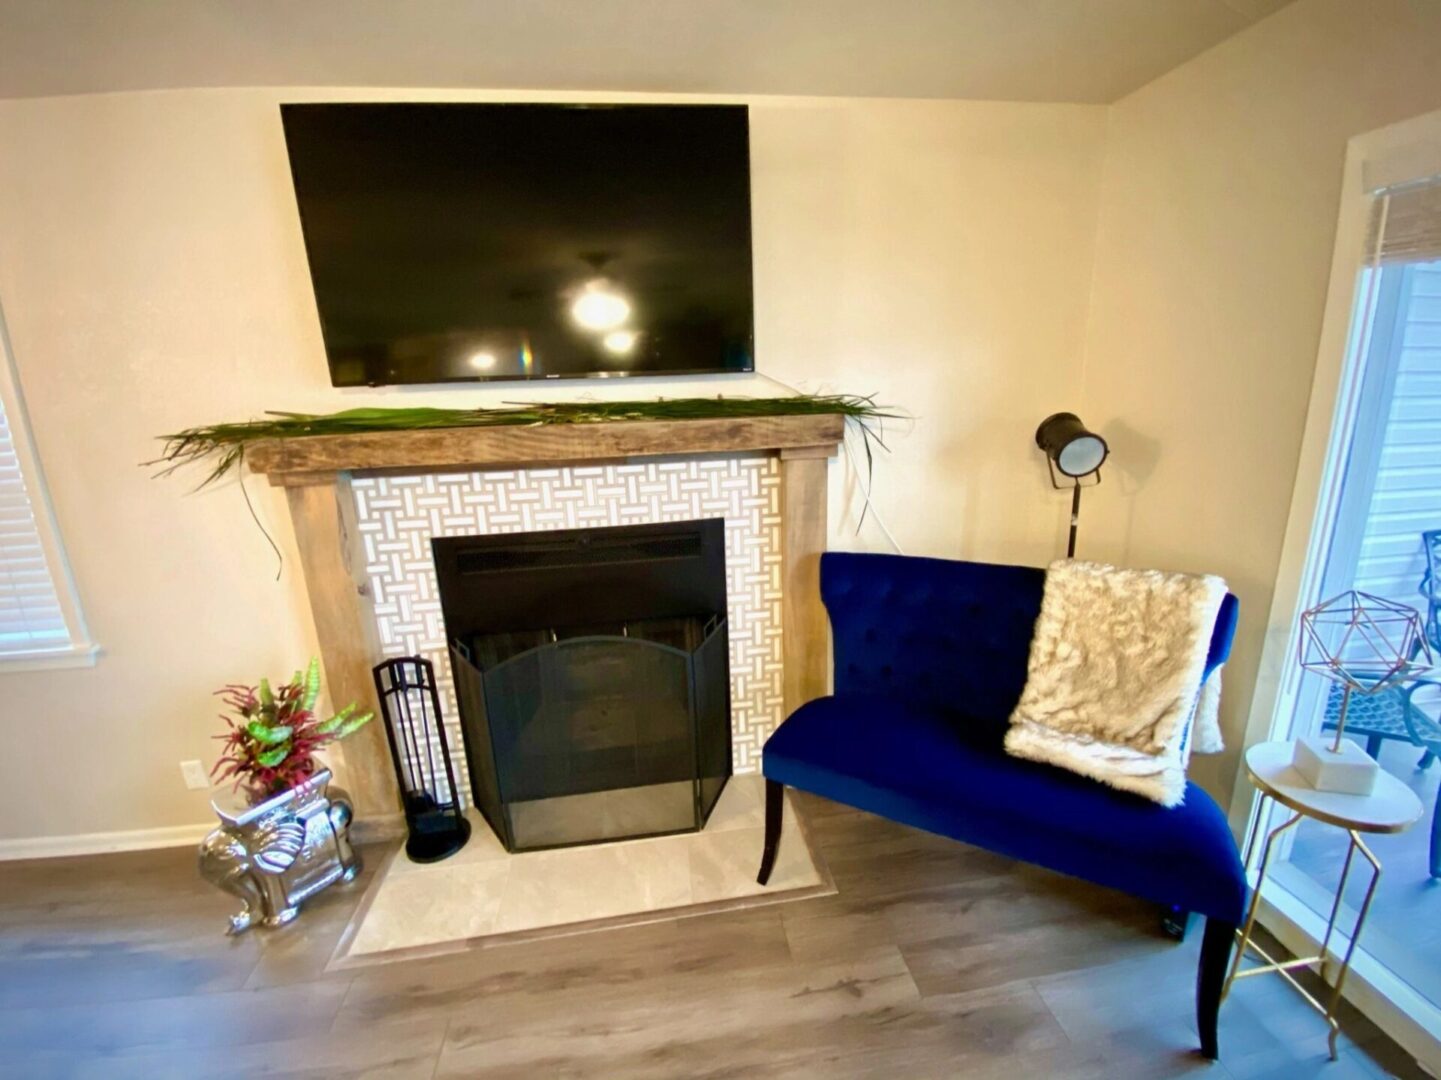 A blue chair and fireplace in the living room